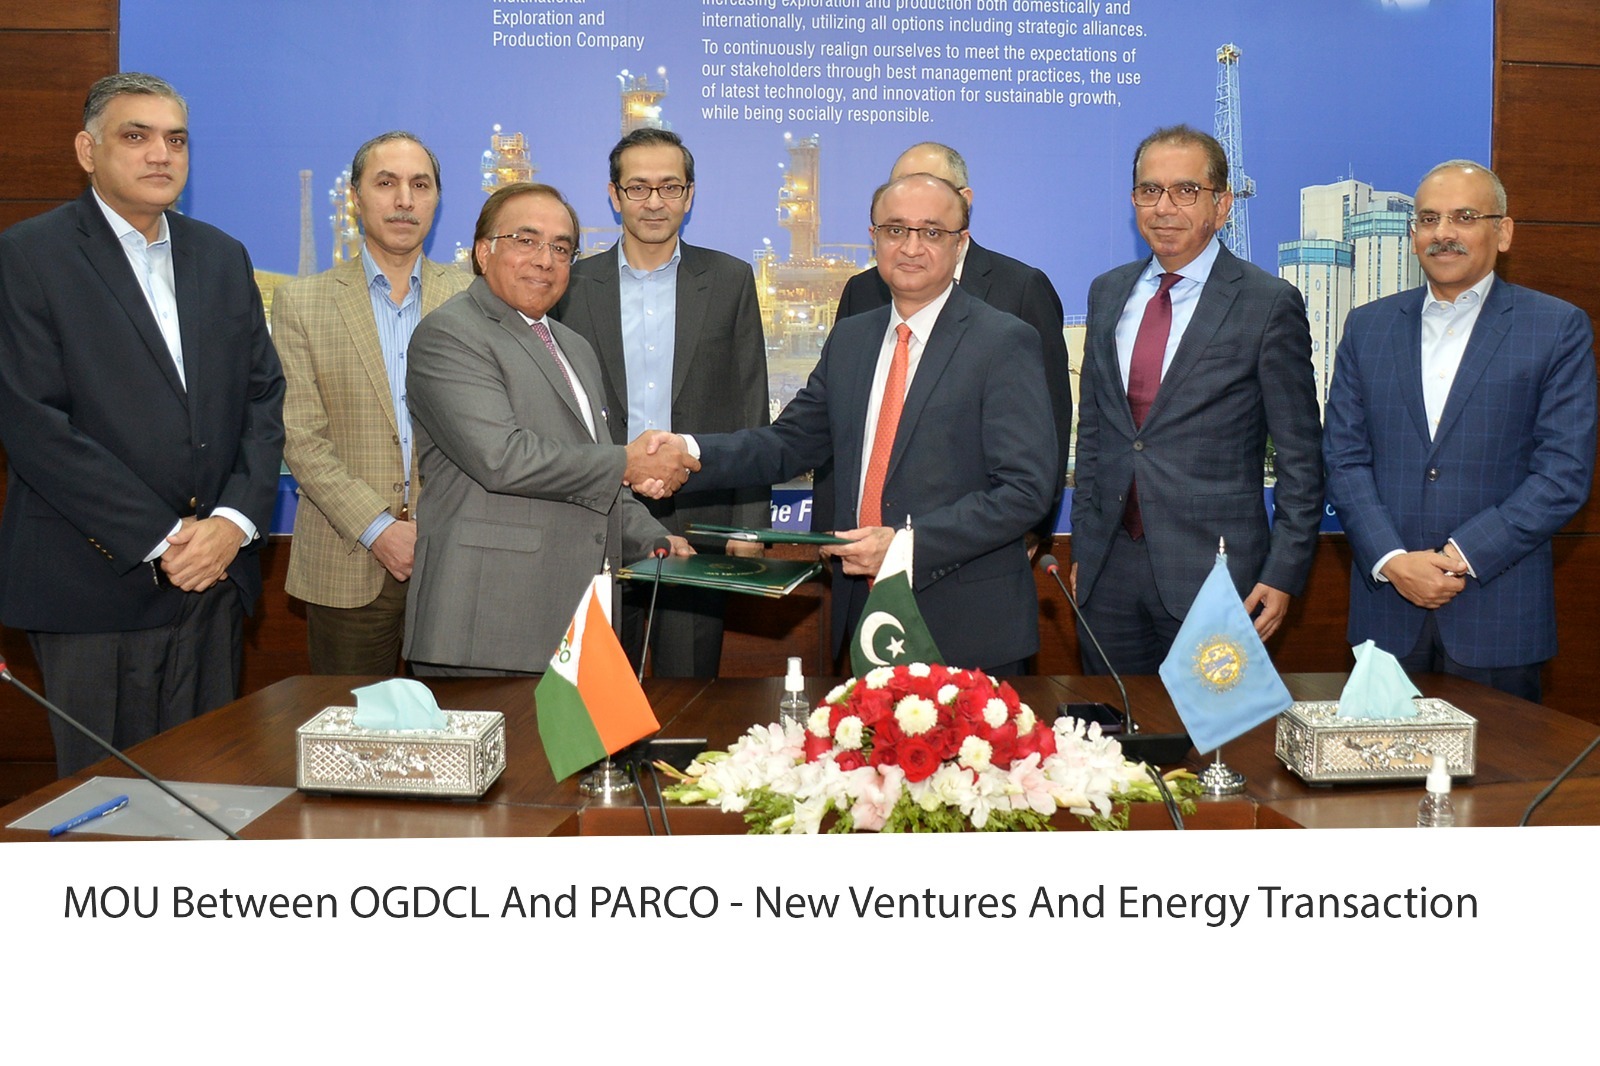 OGDCL, PARCO join hands to explore new ventures